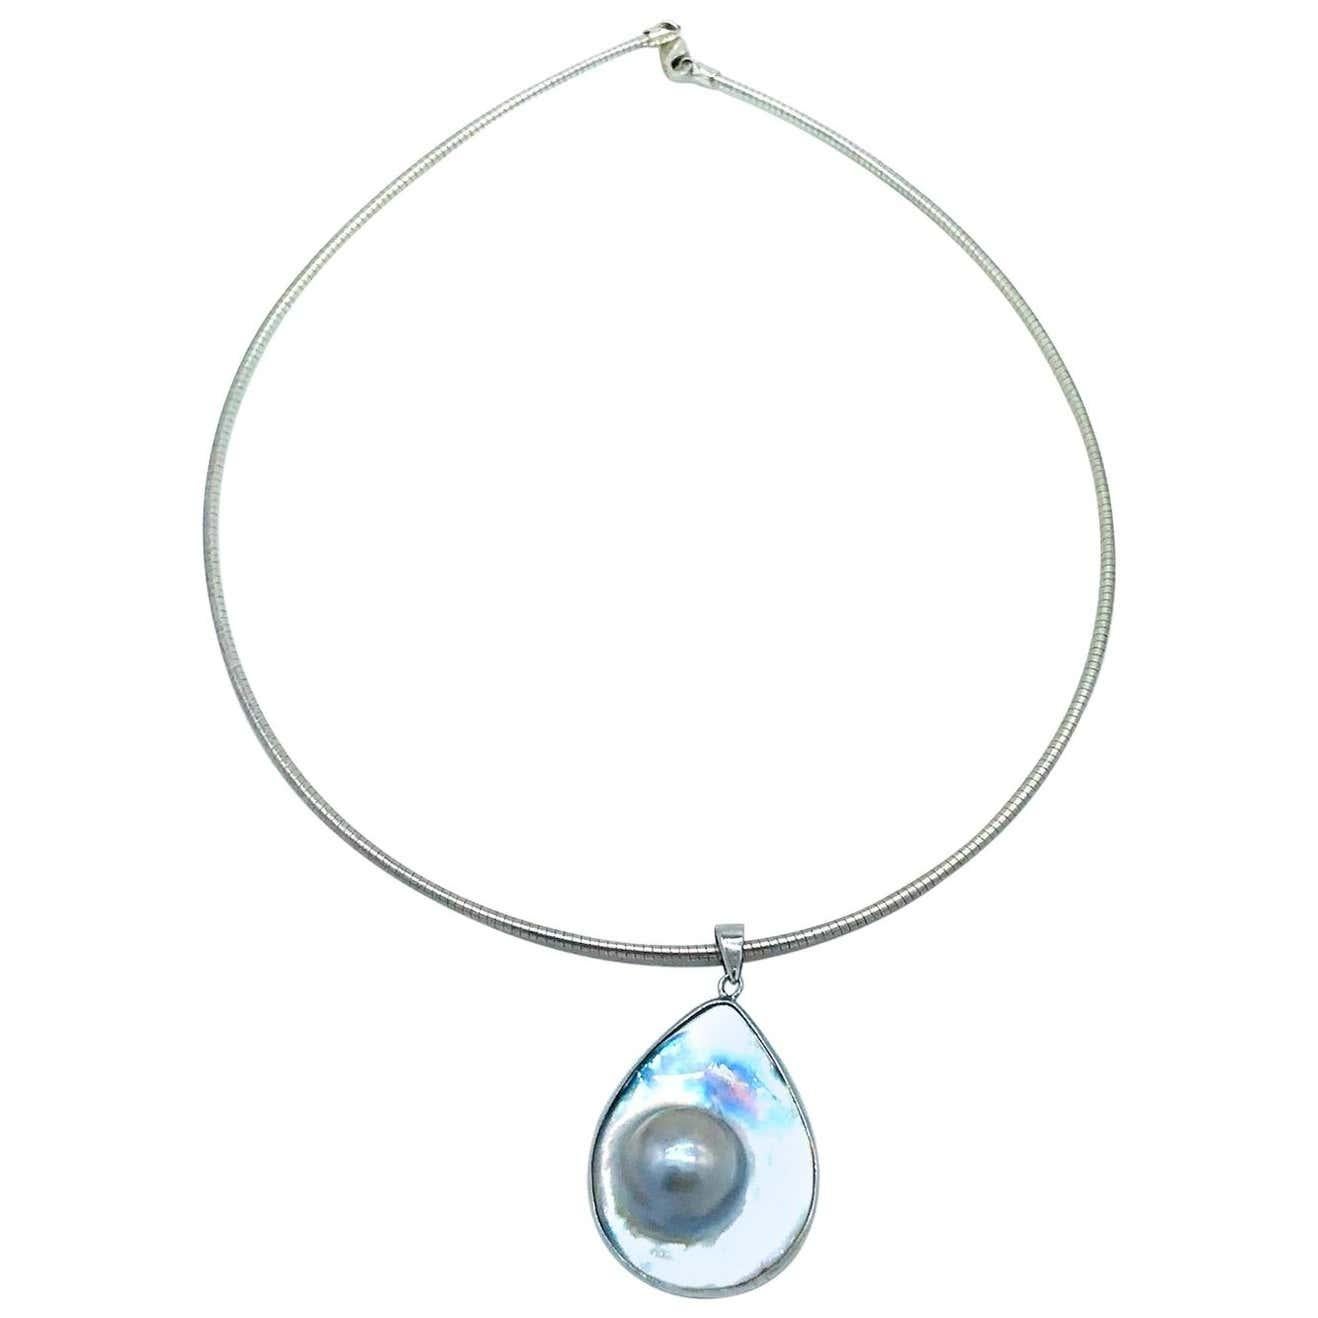 Mother of Pearl, Mobee Pearl Necklace Wire, Pendant
Gray Luminous, Pearl set in a near 1-3/4 x 1-inch, pear shaped drop set in bezel.
Neck wire is a 1.90 mm rounded wire, 18 inches in length
12.3 gram of weight
Back side of pearl is a colorful